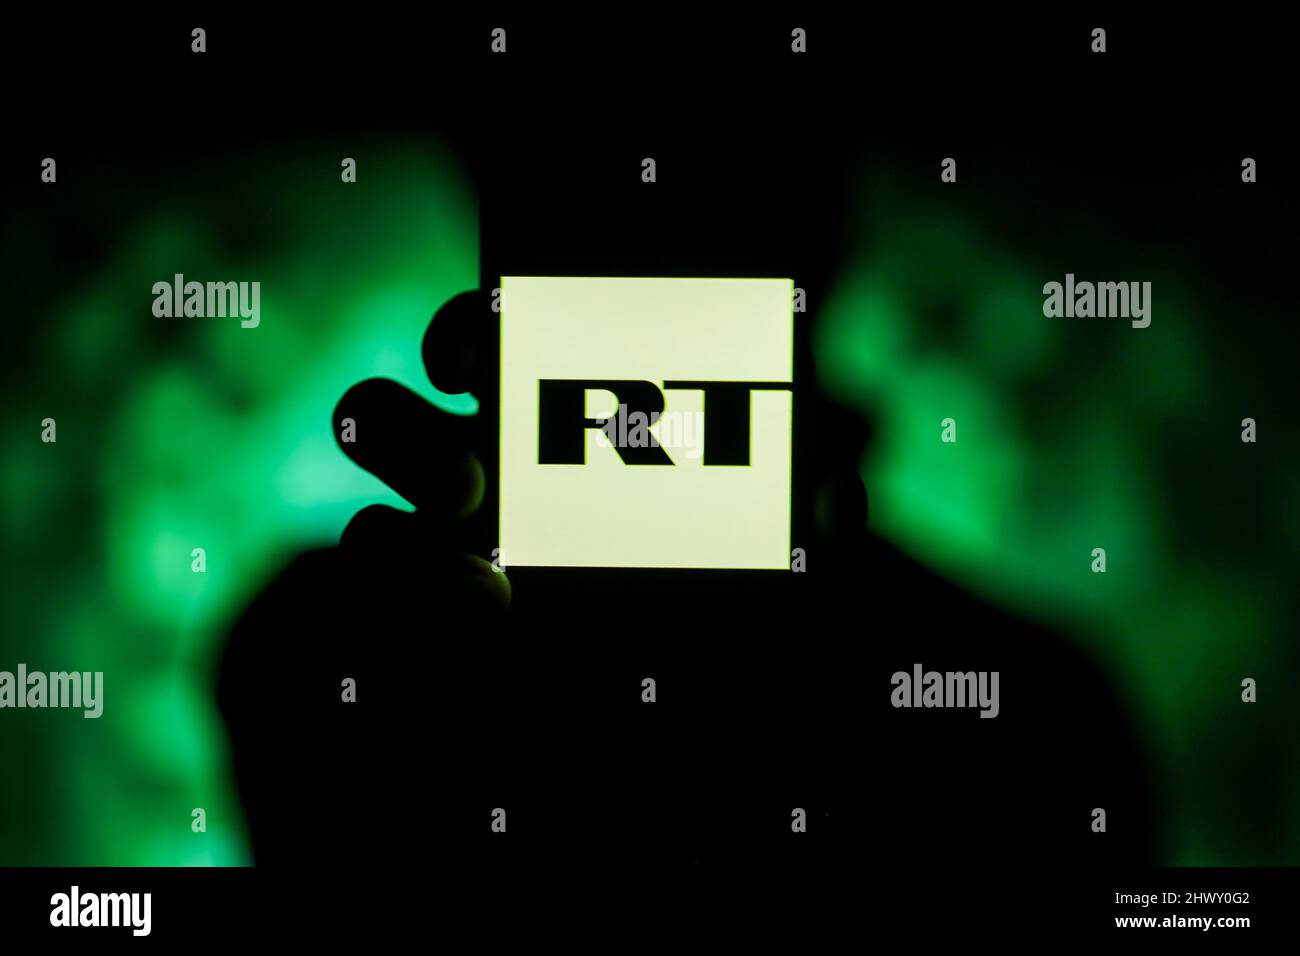 Gaziantep, Turkey. 6th Mar, 2022. Gaziantep, Turkey. 07 March 2022. The logo of RT from the screen of a smartphone. RT, also known as Russia Today, is a Russian state-controlled international television news channel. Recent EU sanctions on Russia in response to Russia's military attack on Ukraine have targeted RT suspending the broadcasting activities of the TV network across the continent and disrupting UK access to the TV network. YouTube has also blocked RT from screaming across Europe and the UK from its social media platform (Credit Image: © Muhammed Ibrahim Ali/IMAGESLIVE via ZUMA Pre Stock Photo